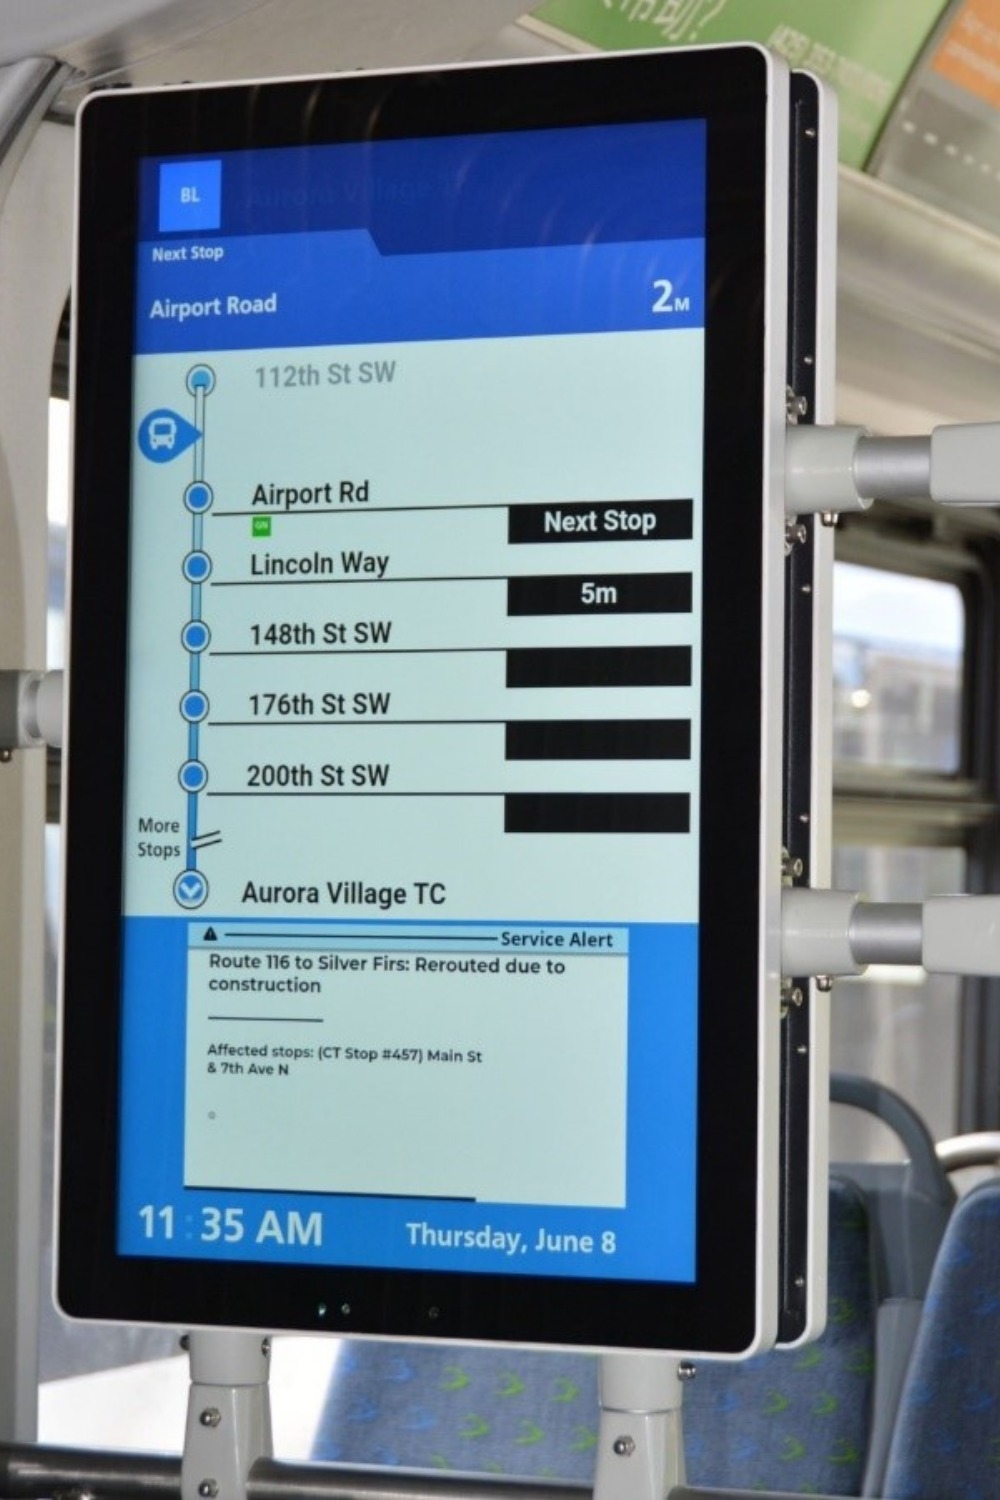 New digital onboard signage on a Community Transit Swift bus shows next stop info and service alerts